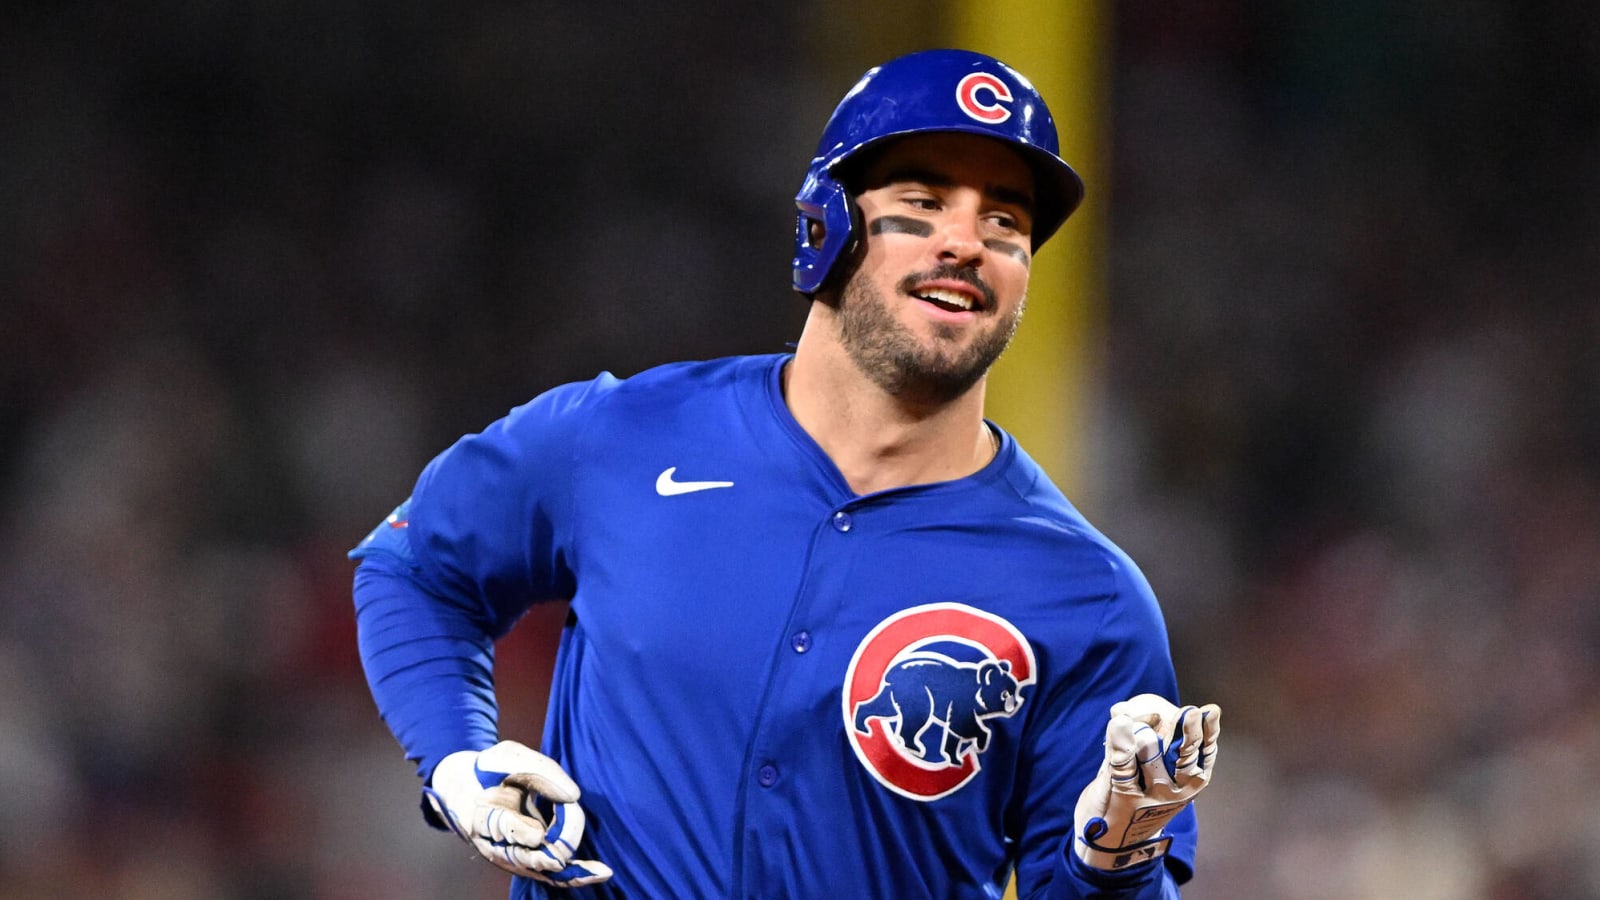 One journeyman outfielder is flourishing with the Cubs